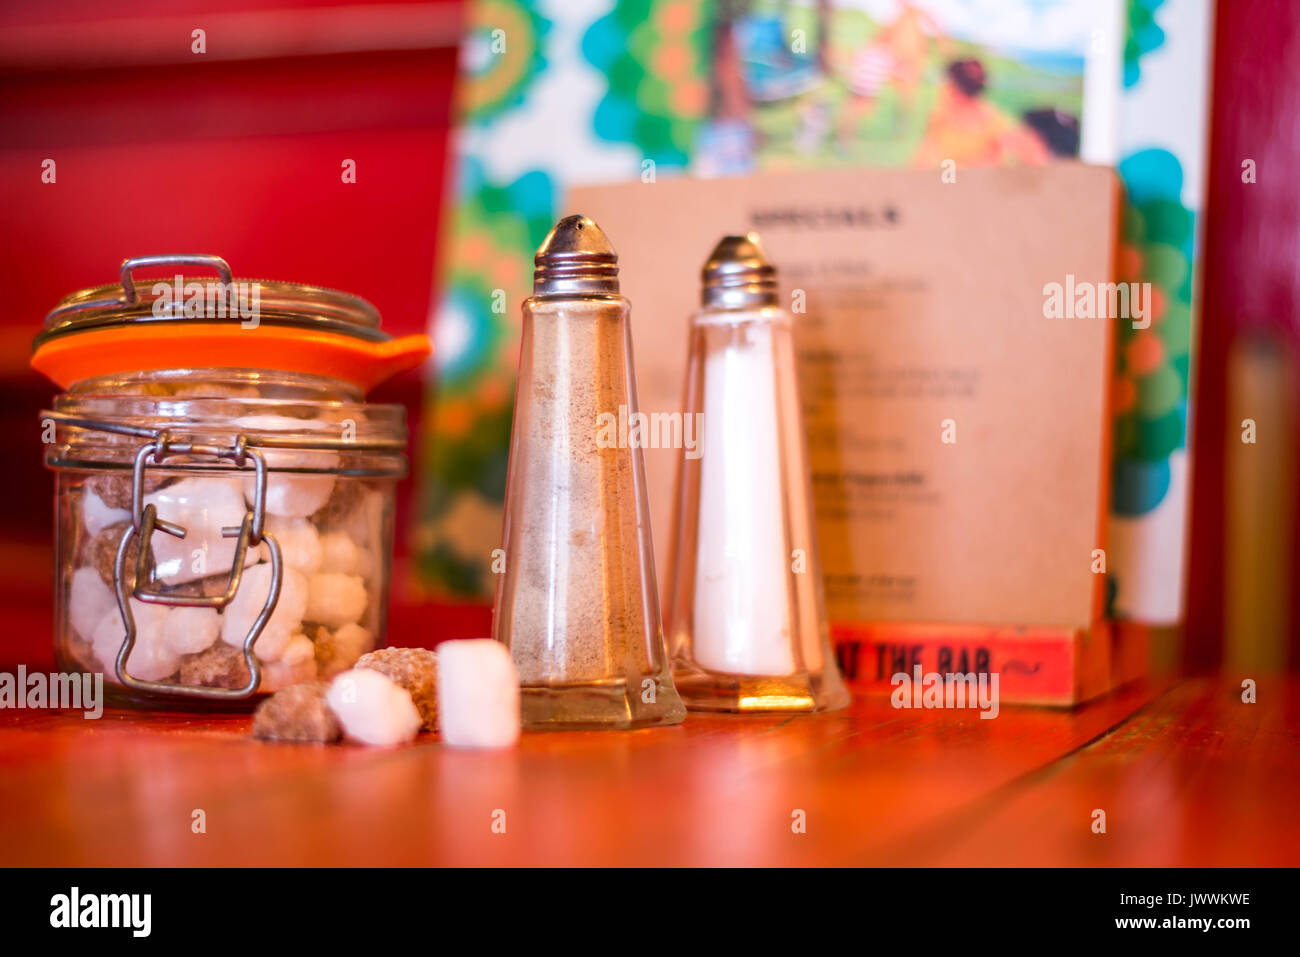 Salt and Pepper Shakers on a Wooden Table Top With a Sugar Container or Pot Stock Photo